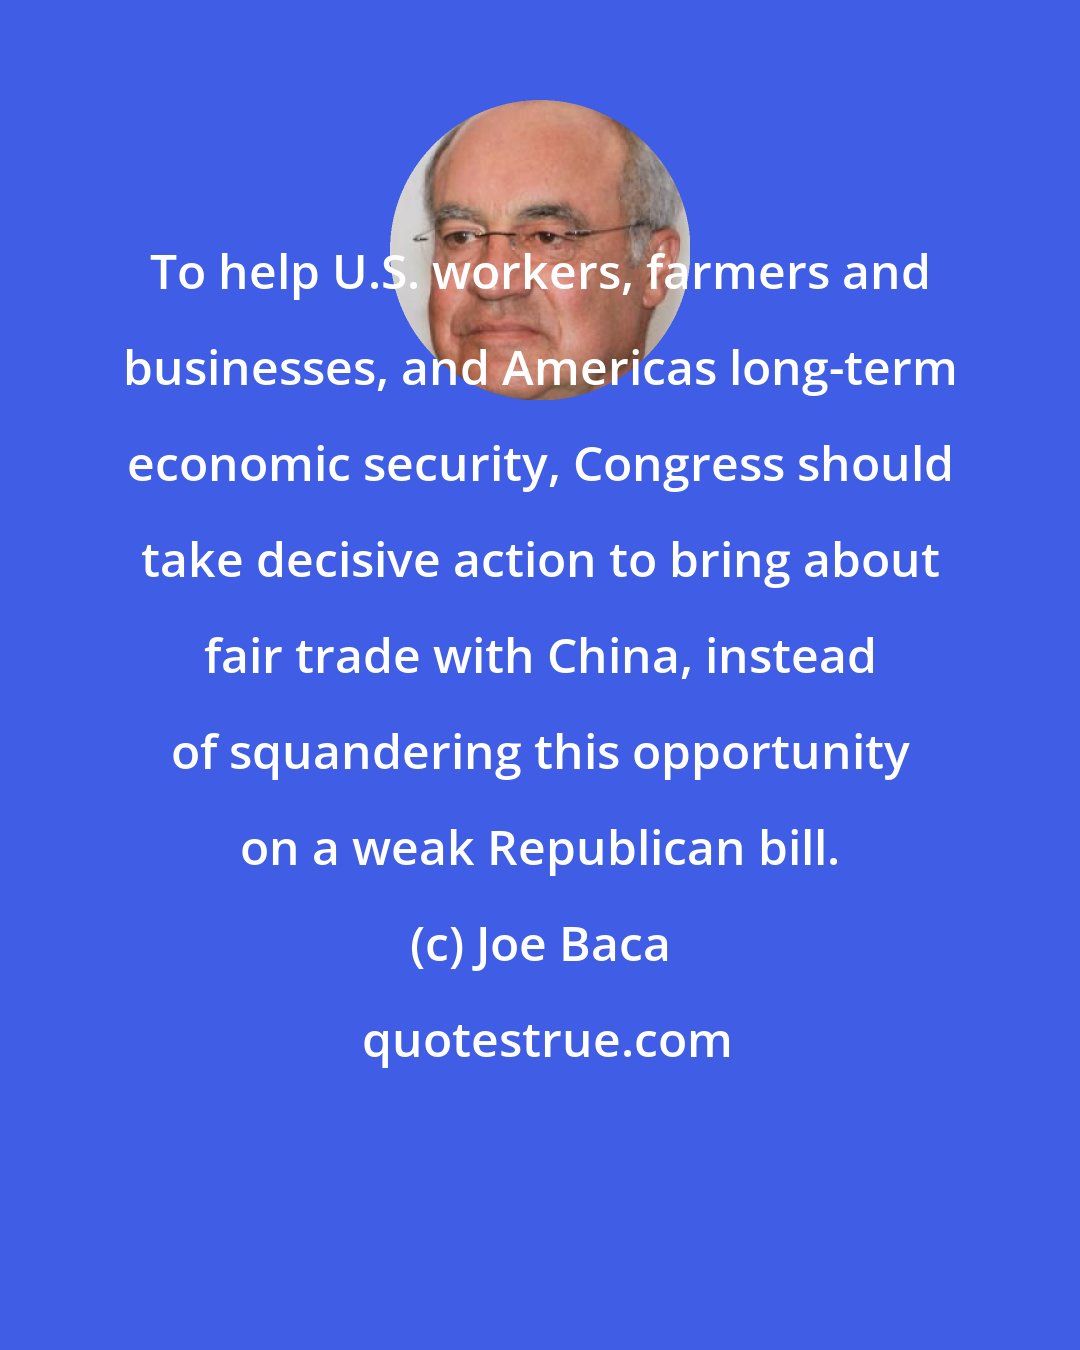 Joe Baca: To help U.S. workers, farmers and businesses, and Americas long-term economic security, Congress should take decisive action to bring about fair trade with China, instead of squandering this opportunity on a weak Republican bill.